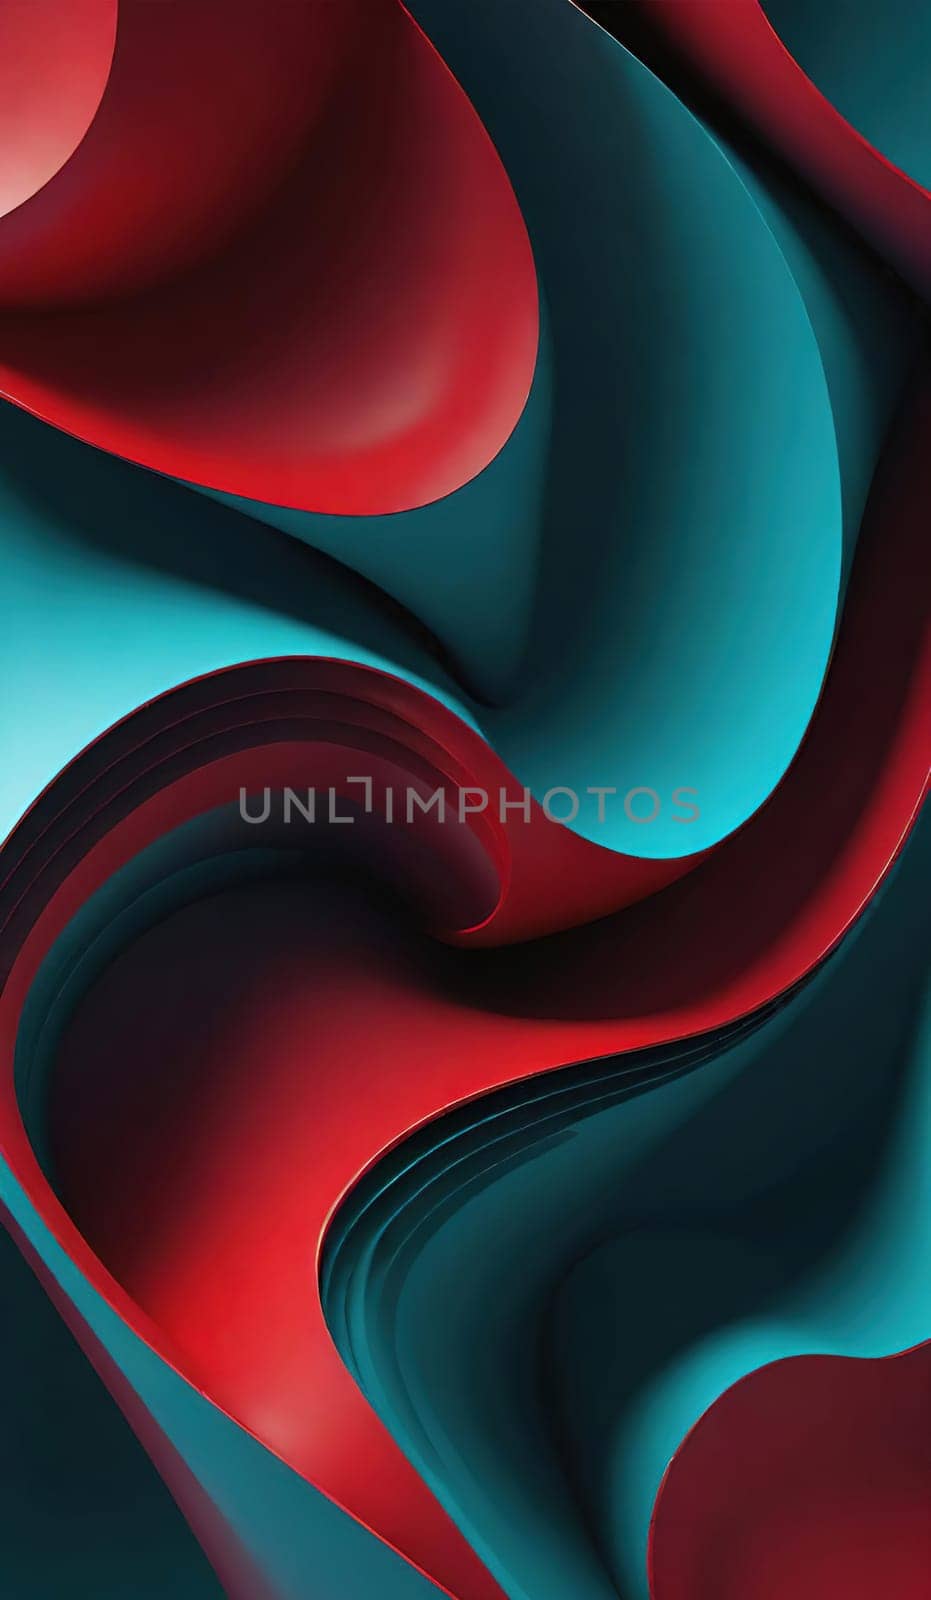 Abstract background with red, blue and green curved sheets of paper.abstract background with smooth wavy lines in blue and red colors.3d render, abstract background with red and blue wavy layers.